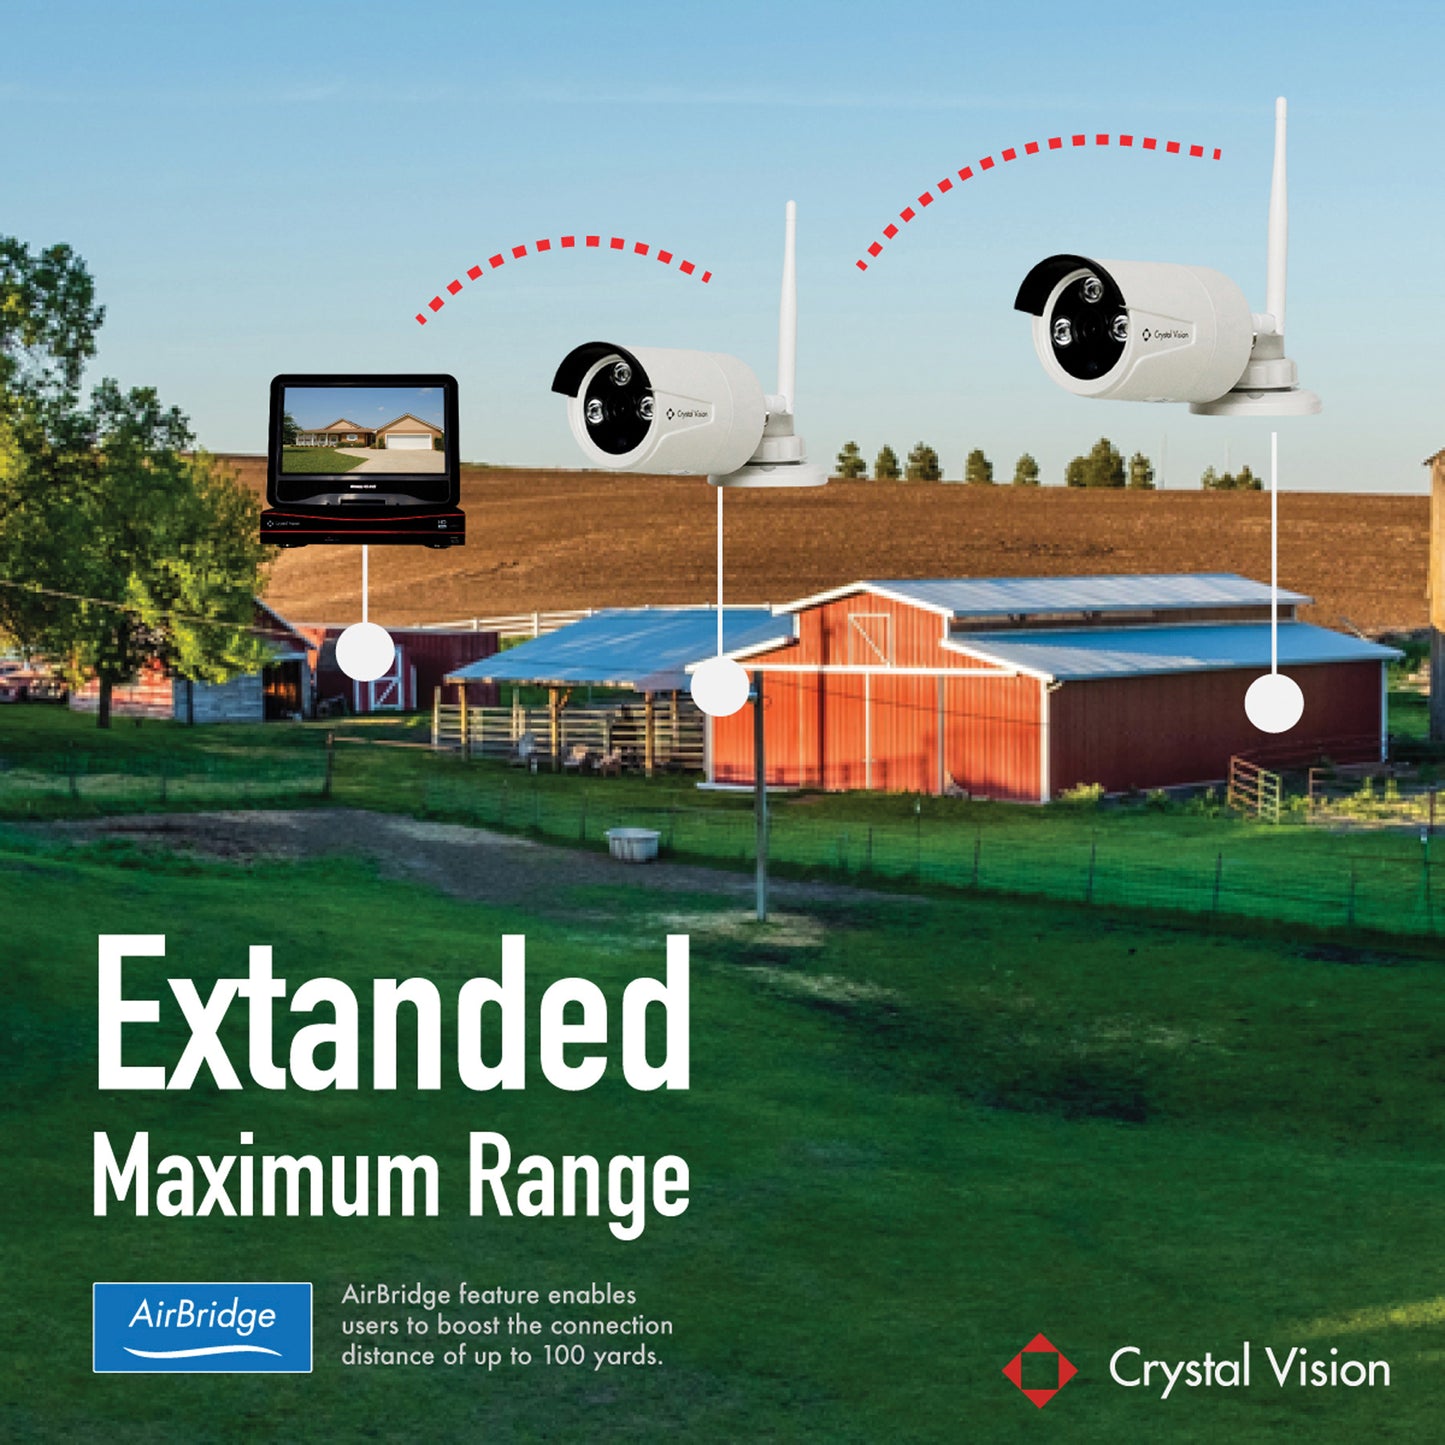 Promotional image for Crystal Vision showing _Extended Maximum Range_ with an AirBridge feature, depicting wireless security cameras connecting over a distance to NVR system